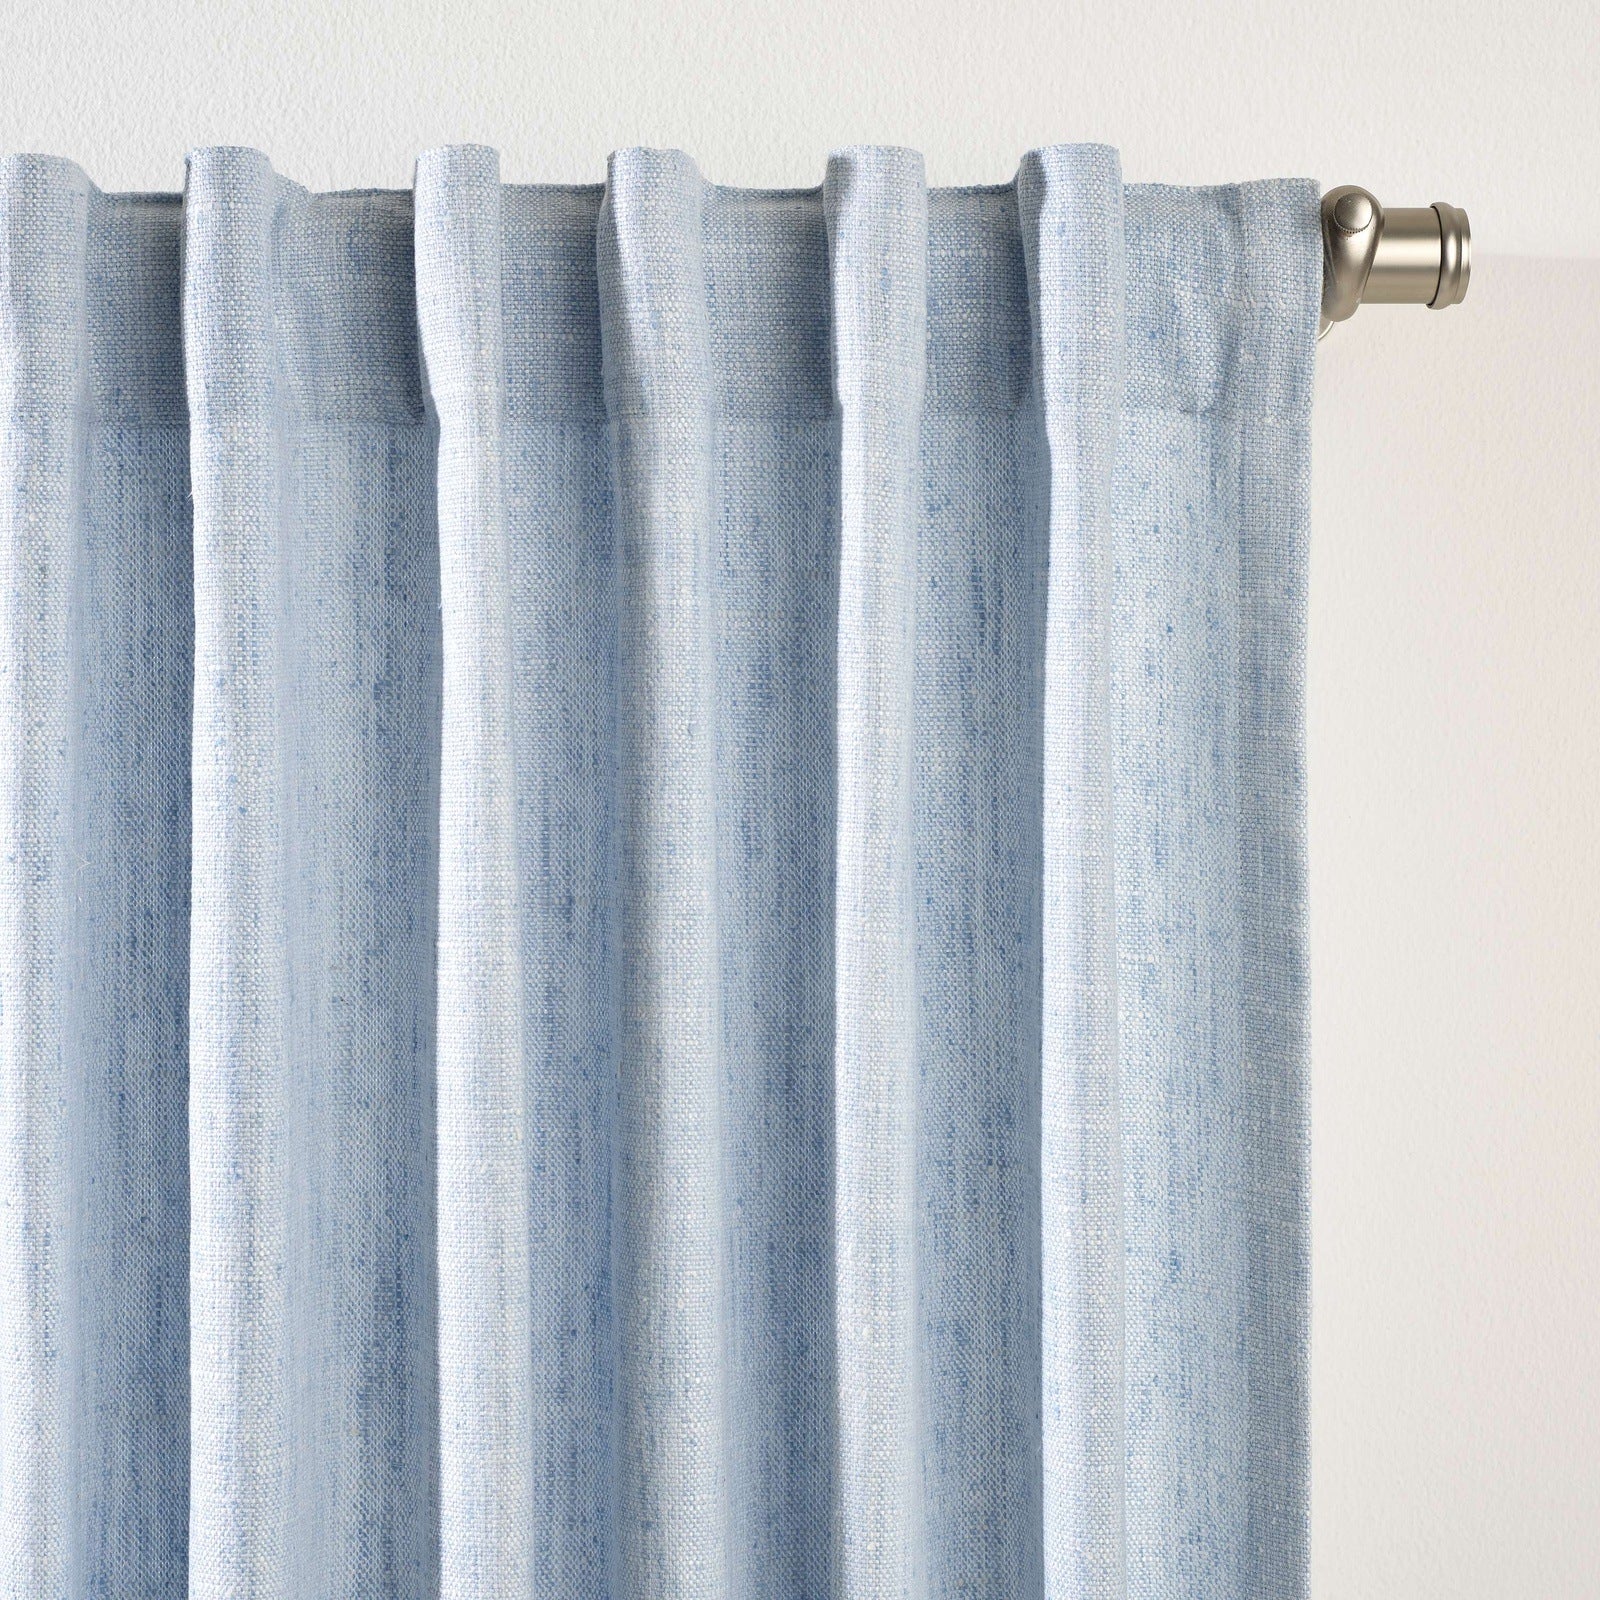 Pine Cone Hill Greylock Fr Blue Indoor/Outdoor Curtain Panel